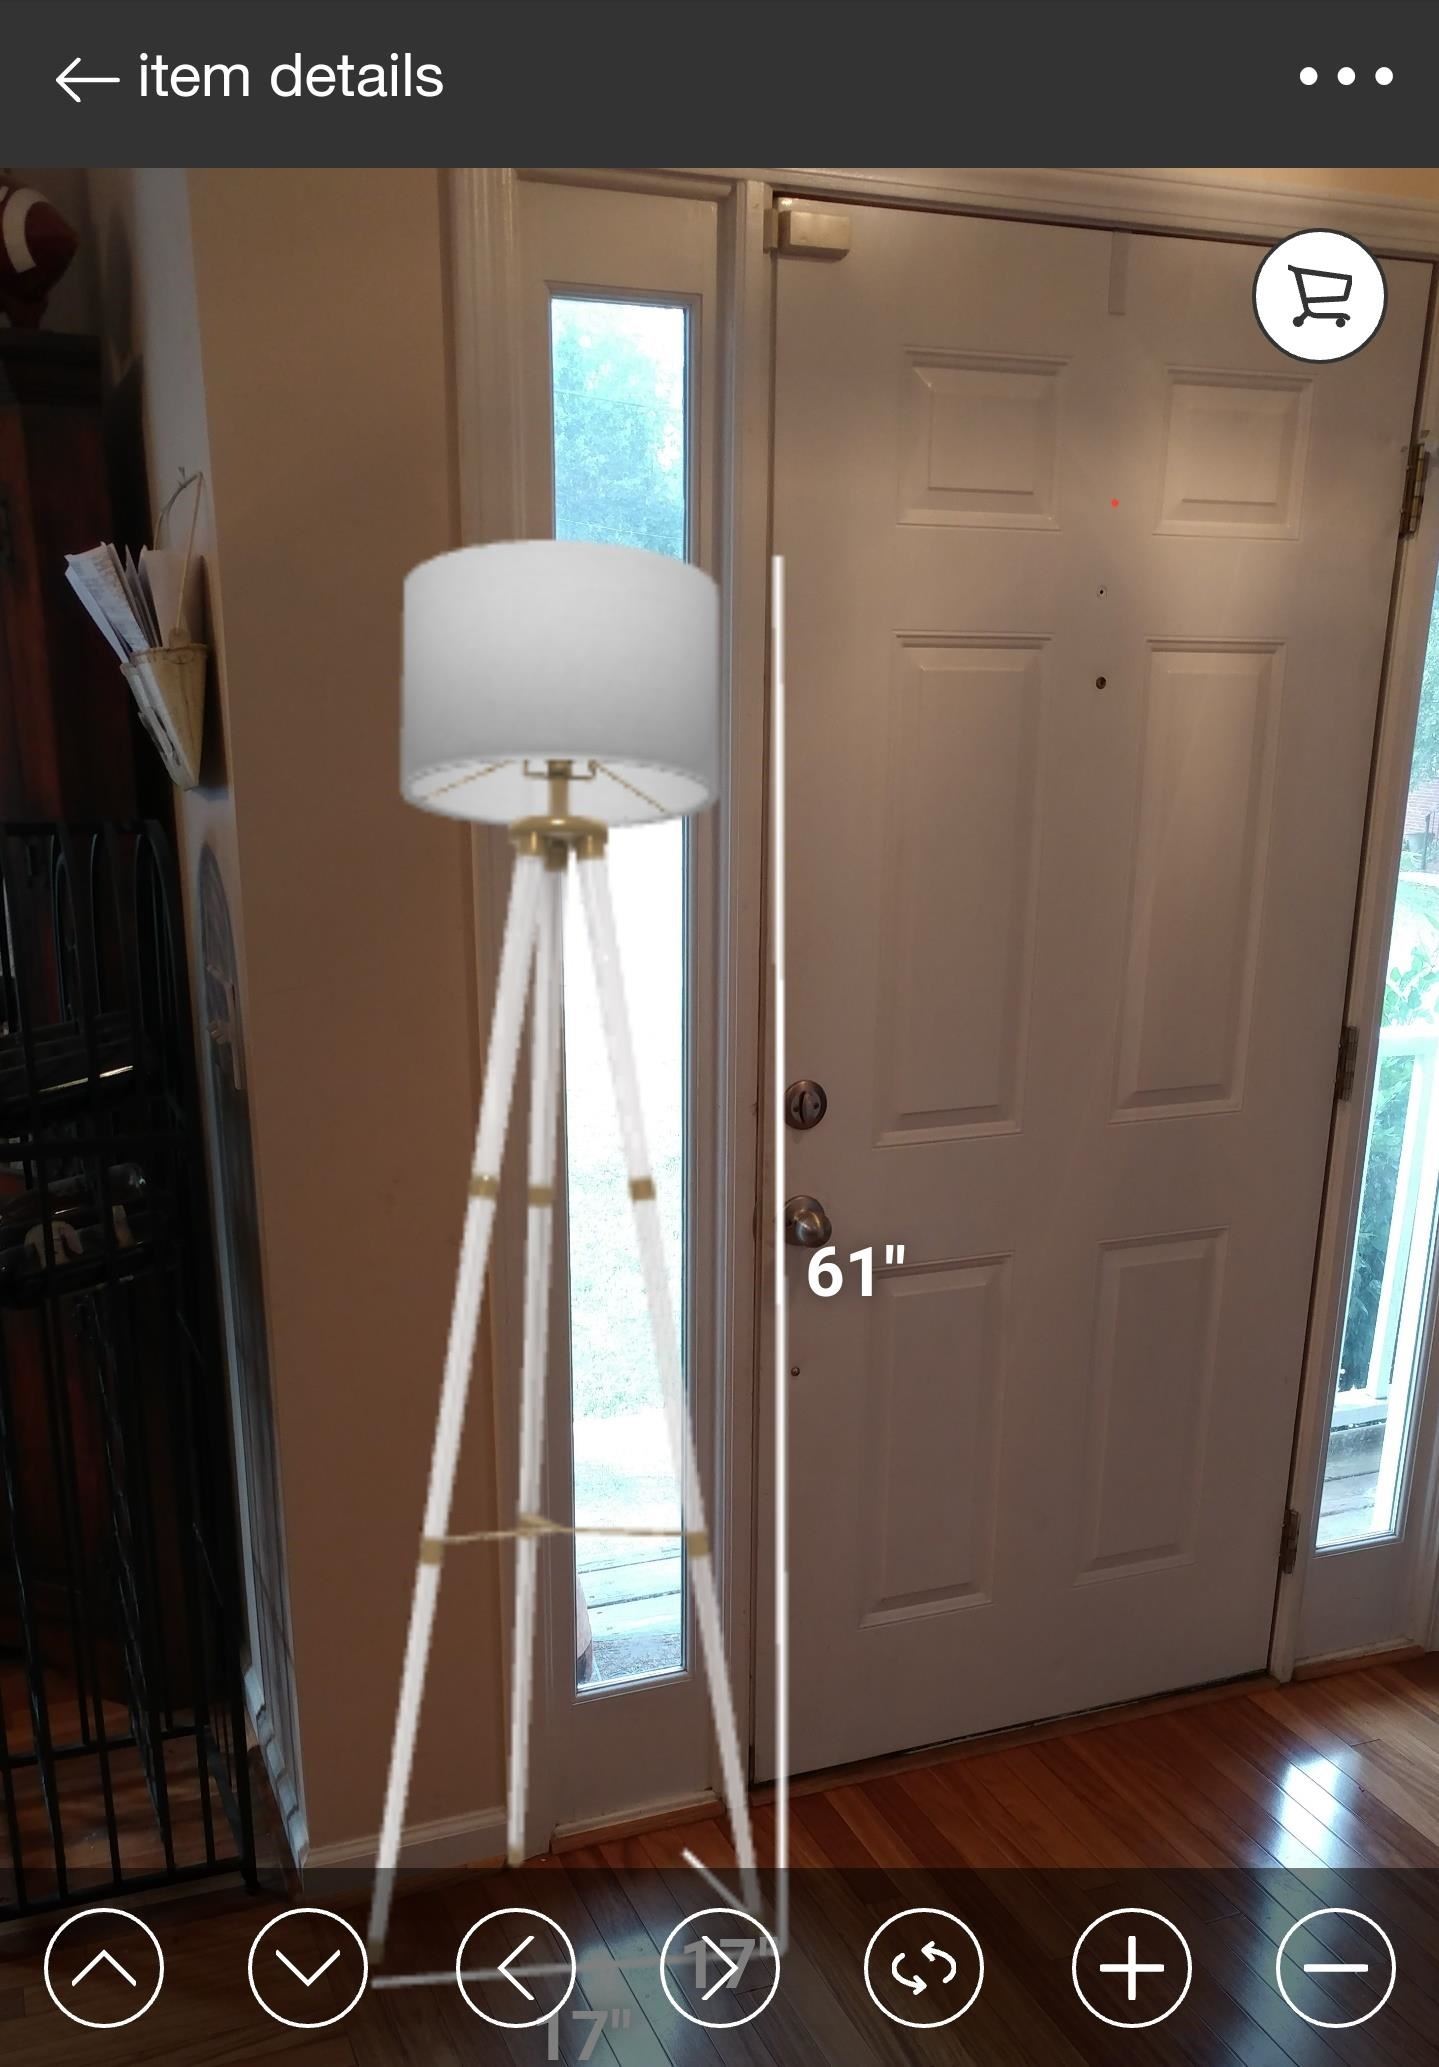 Target Focuses on Mobile Web Rather Than App for AR Shopping Tool